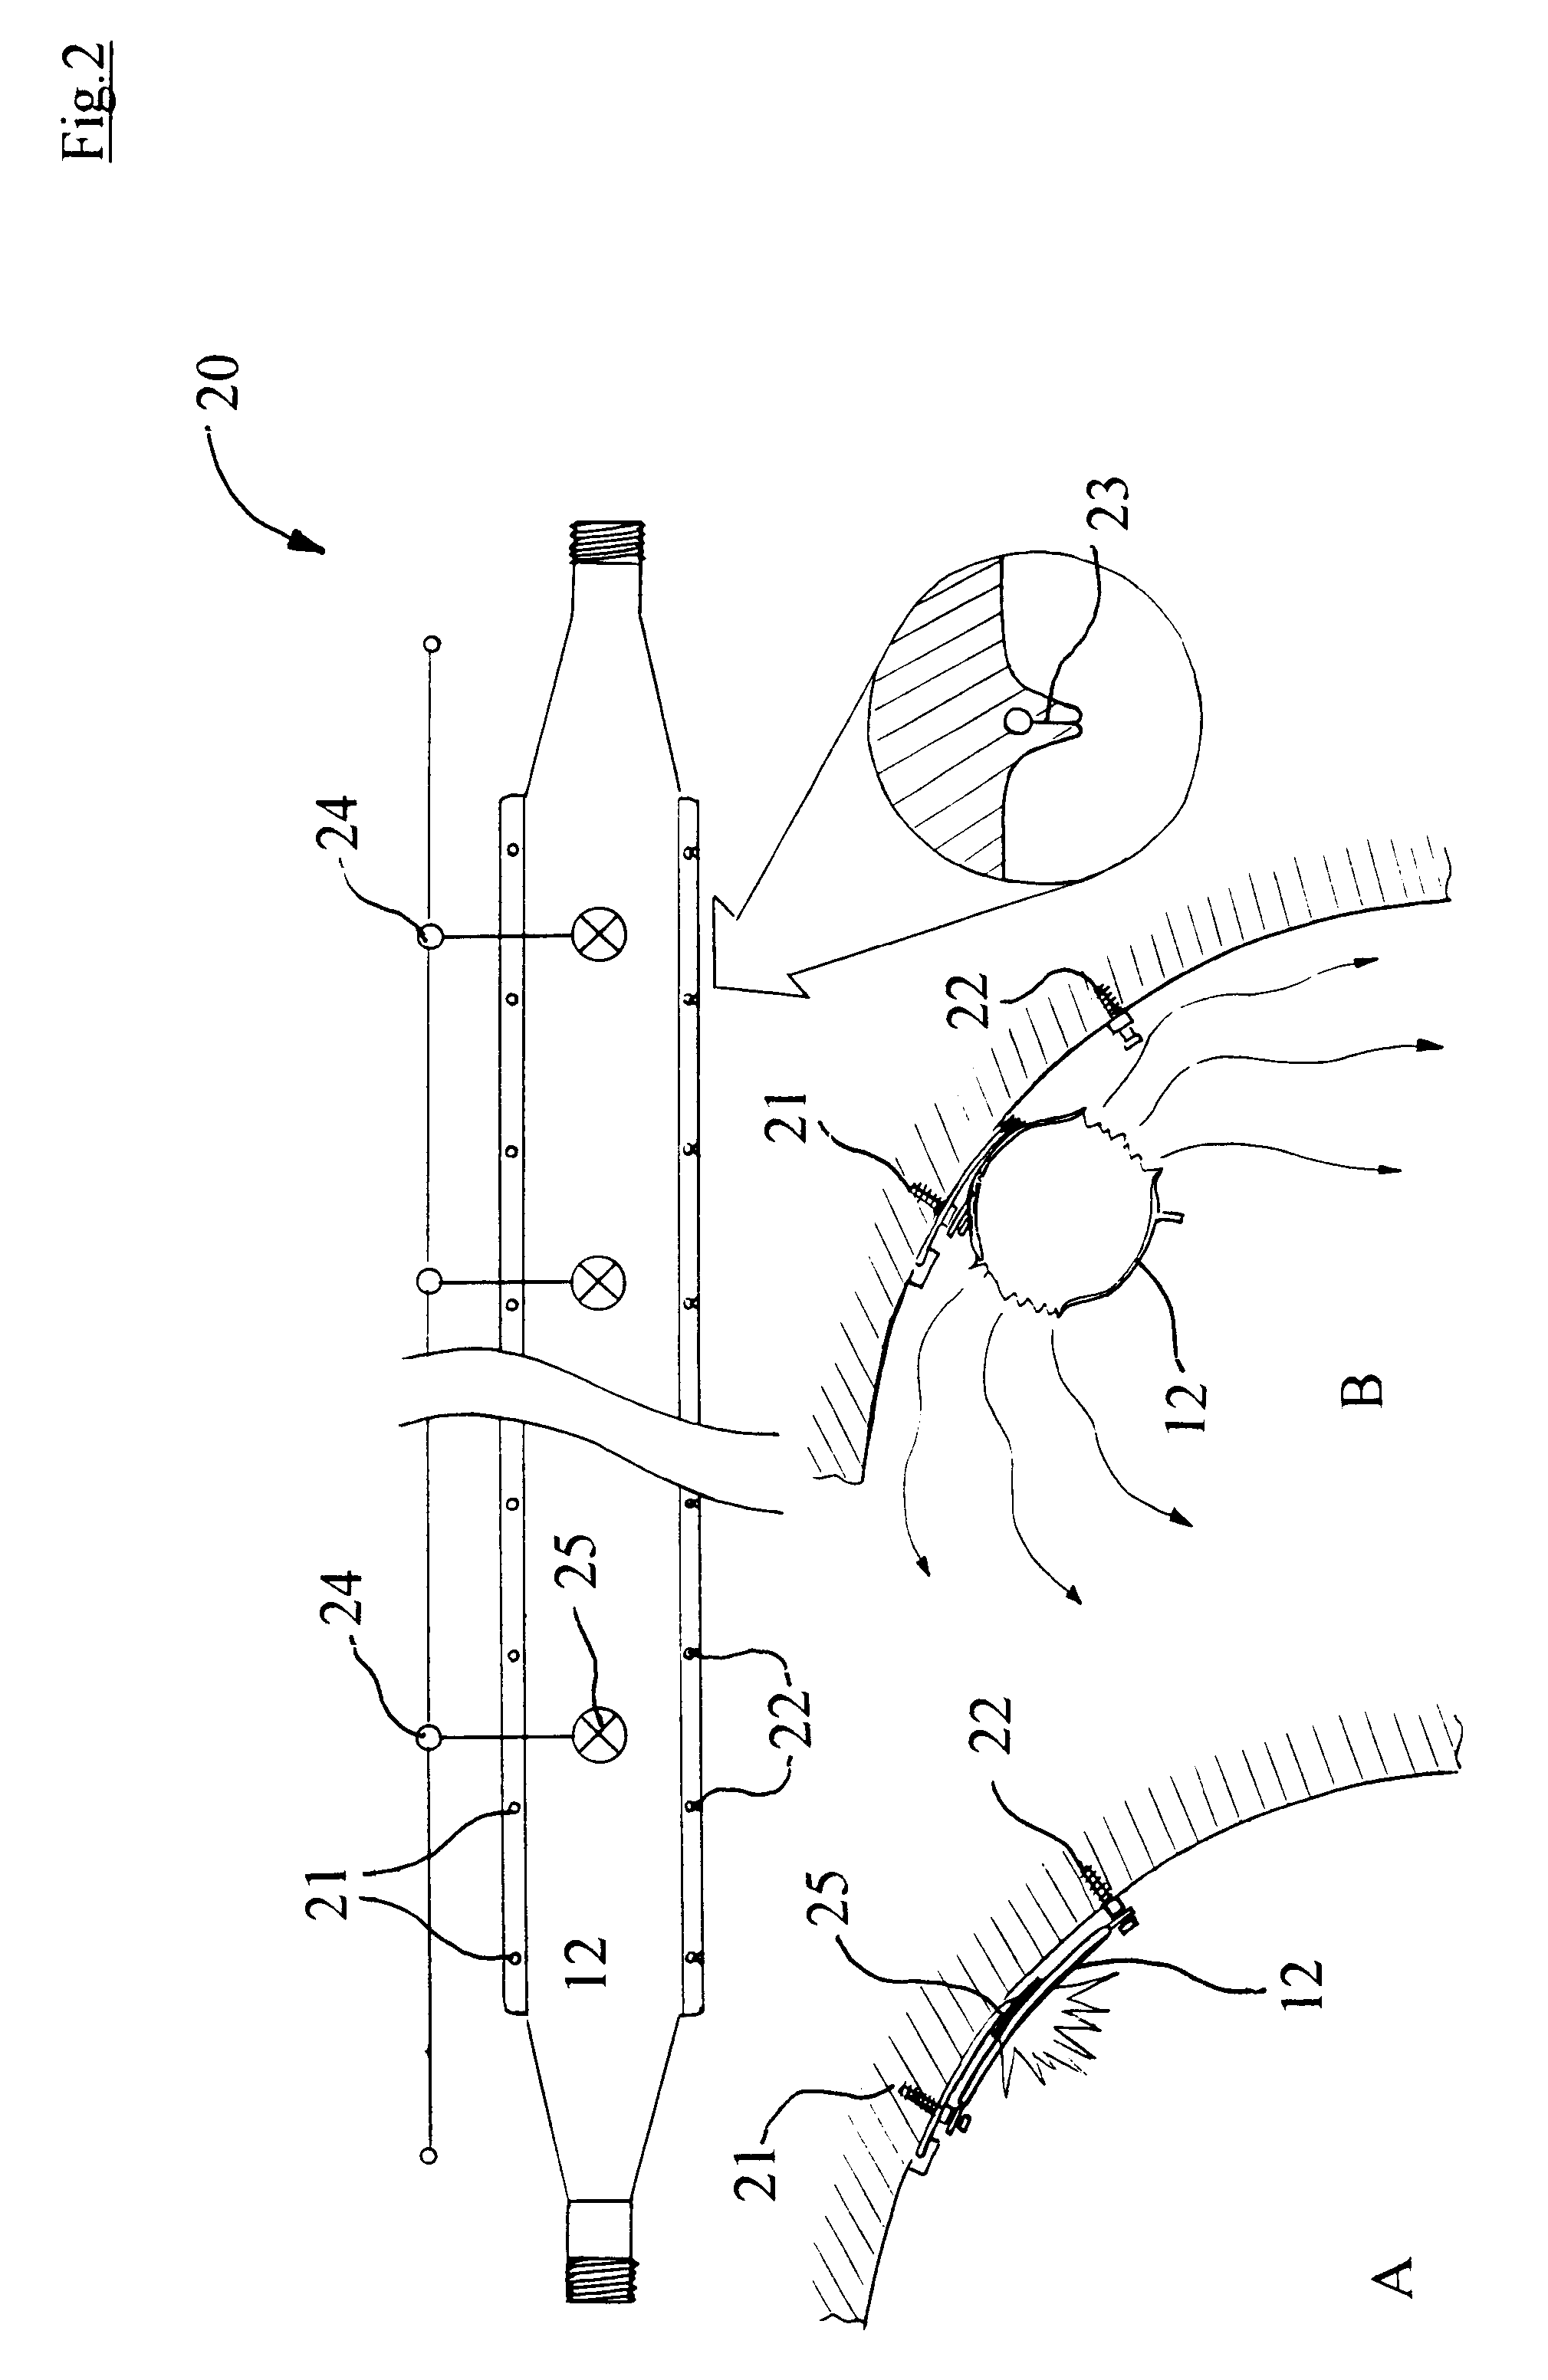 Tunnel fire suppression system and methods for selective delivery of breathable fire suppressant directly to fire site